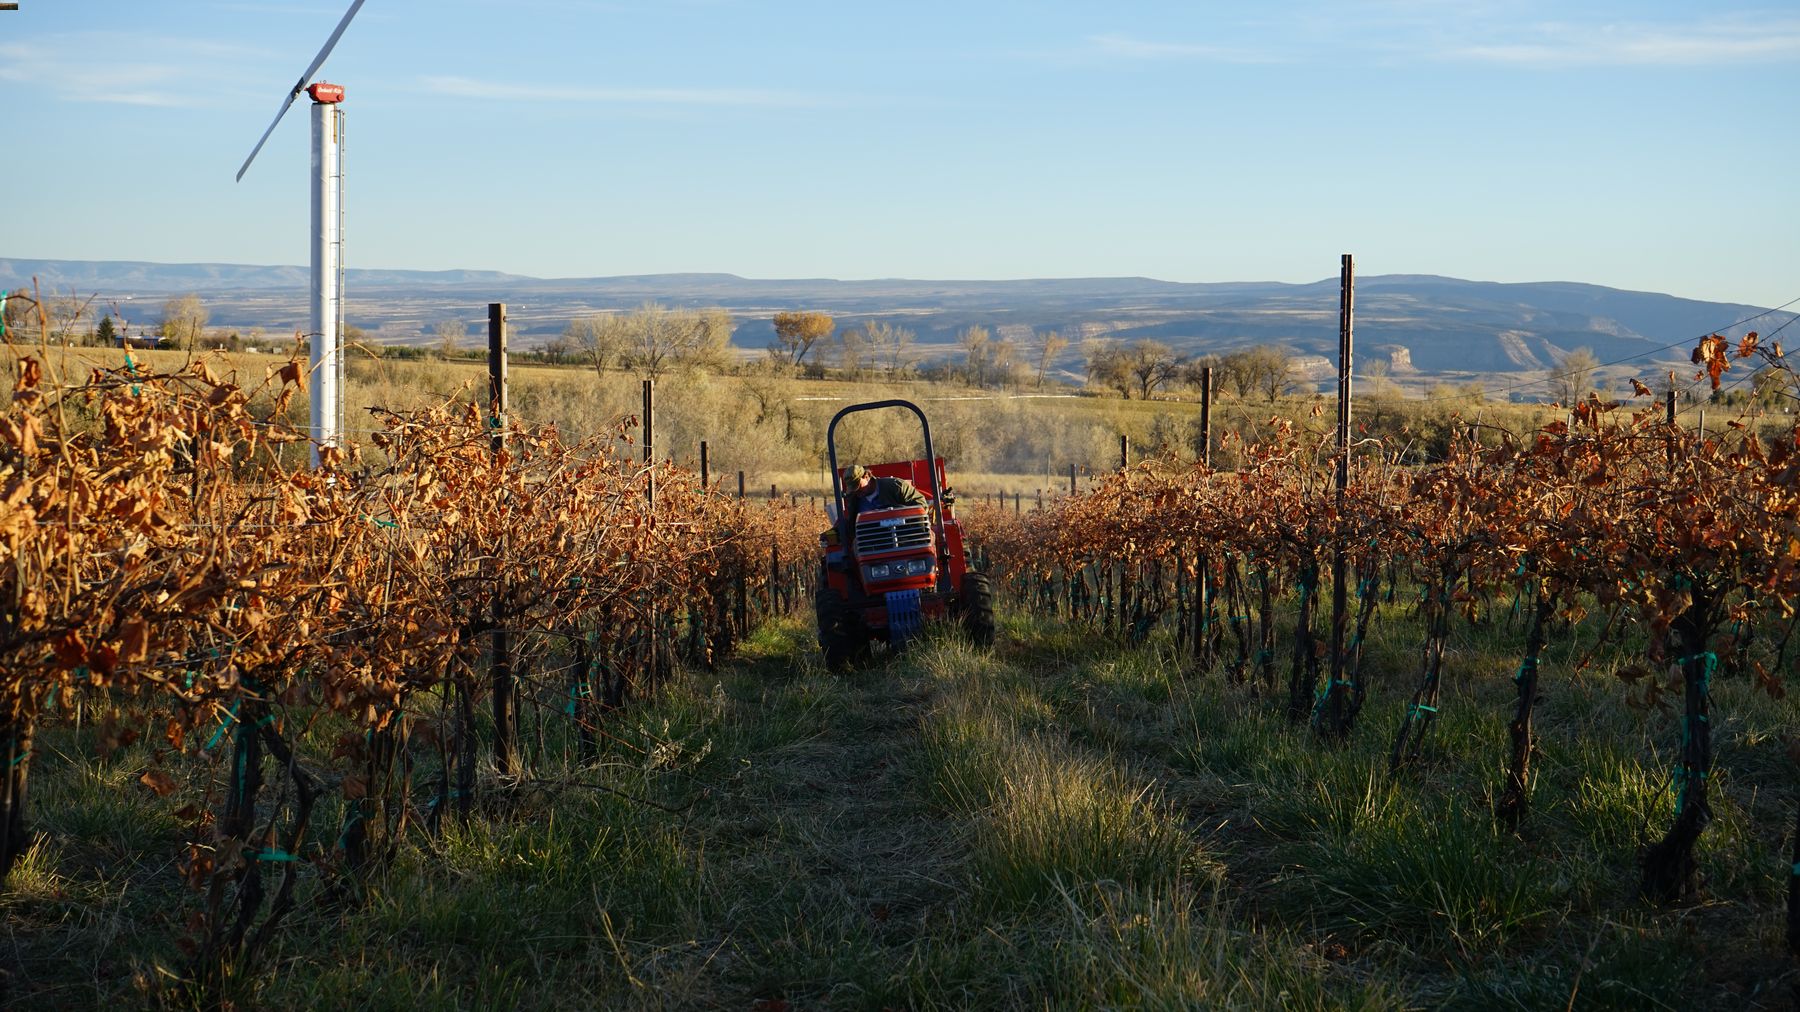 Lance Hanson driving a tractor in his biodynamic vineyard and spraying compost tea over grapevines with brown leaves.